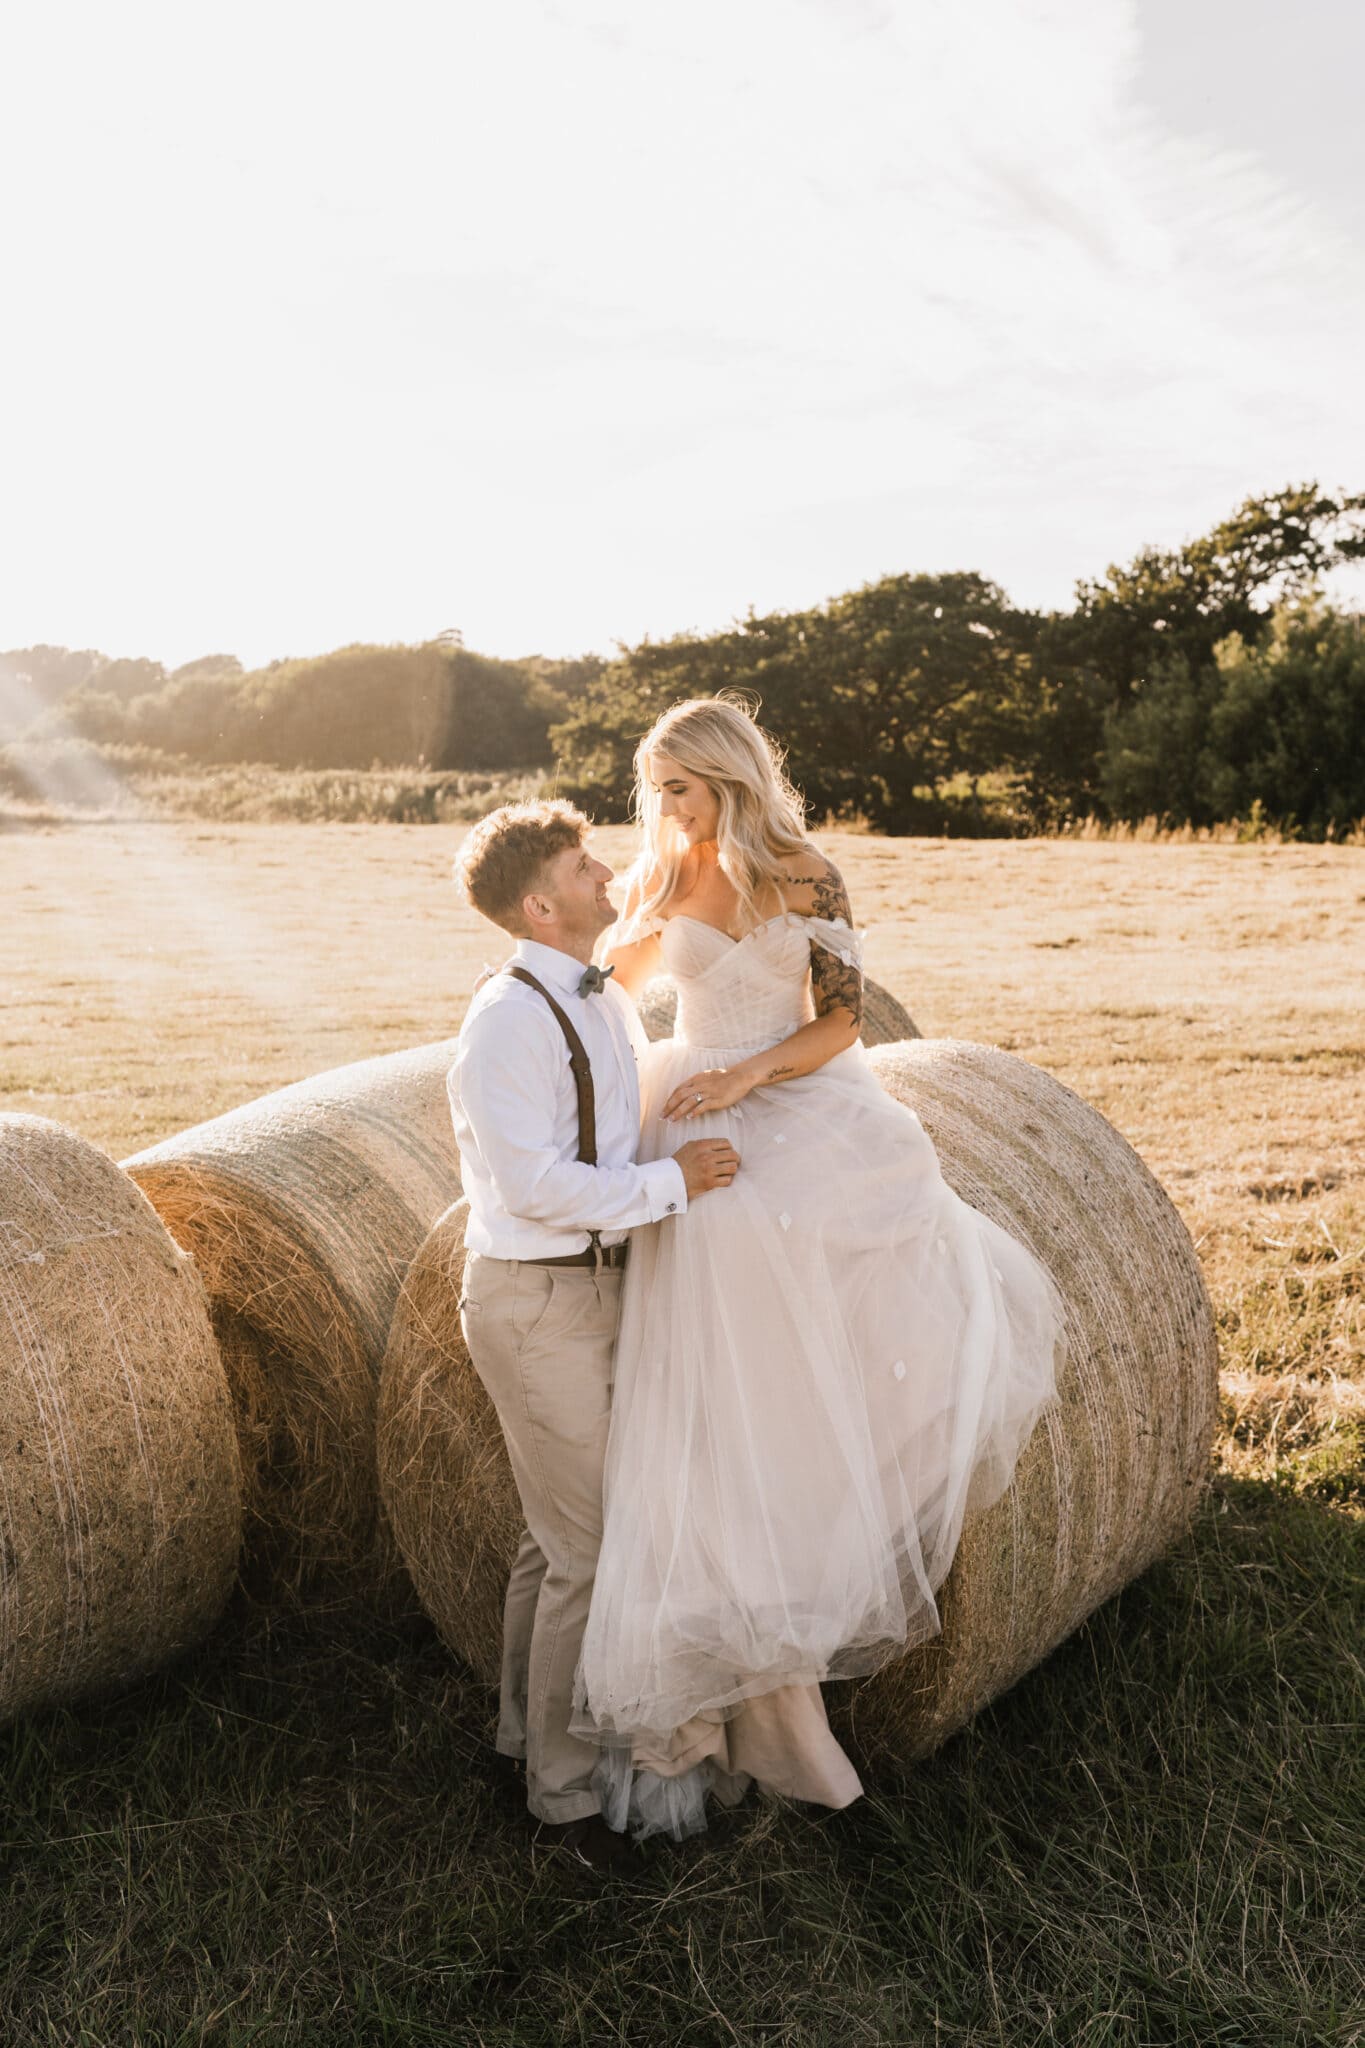 A couple in wedding attire lovingly gazes at each other, standing between large hay bales in a sunlit field. the setting sun casts a warm glow over the scene.